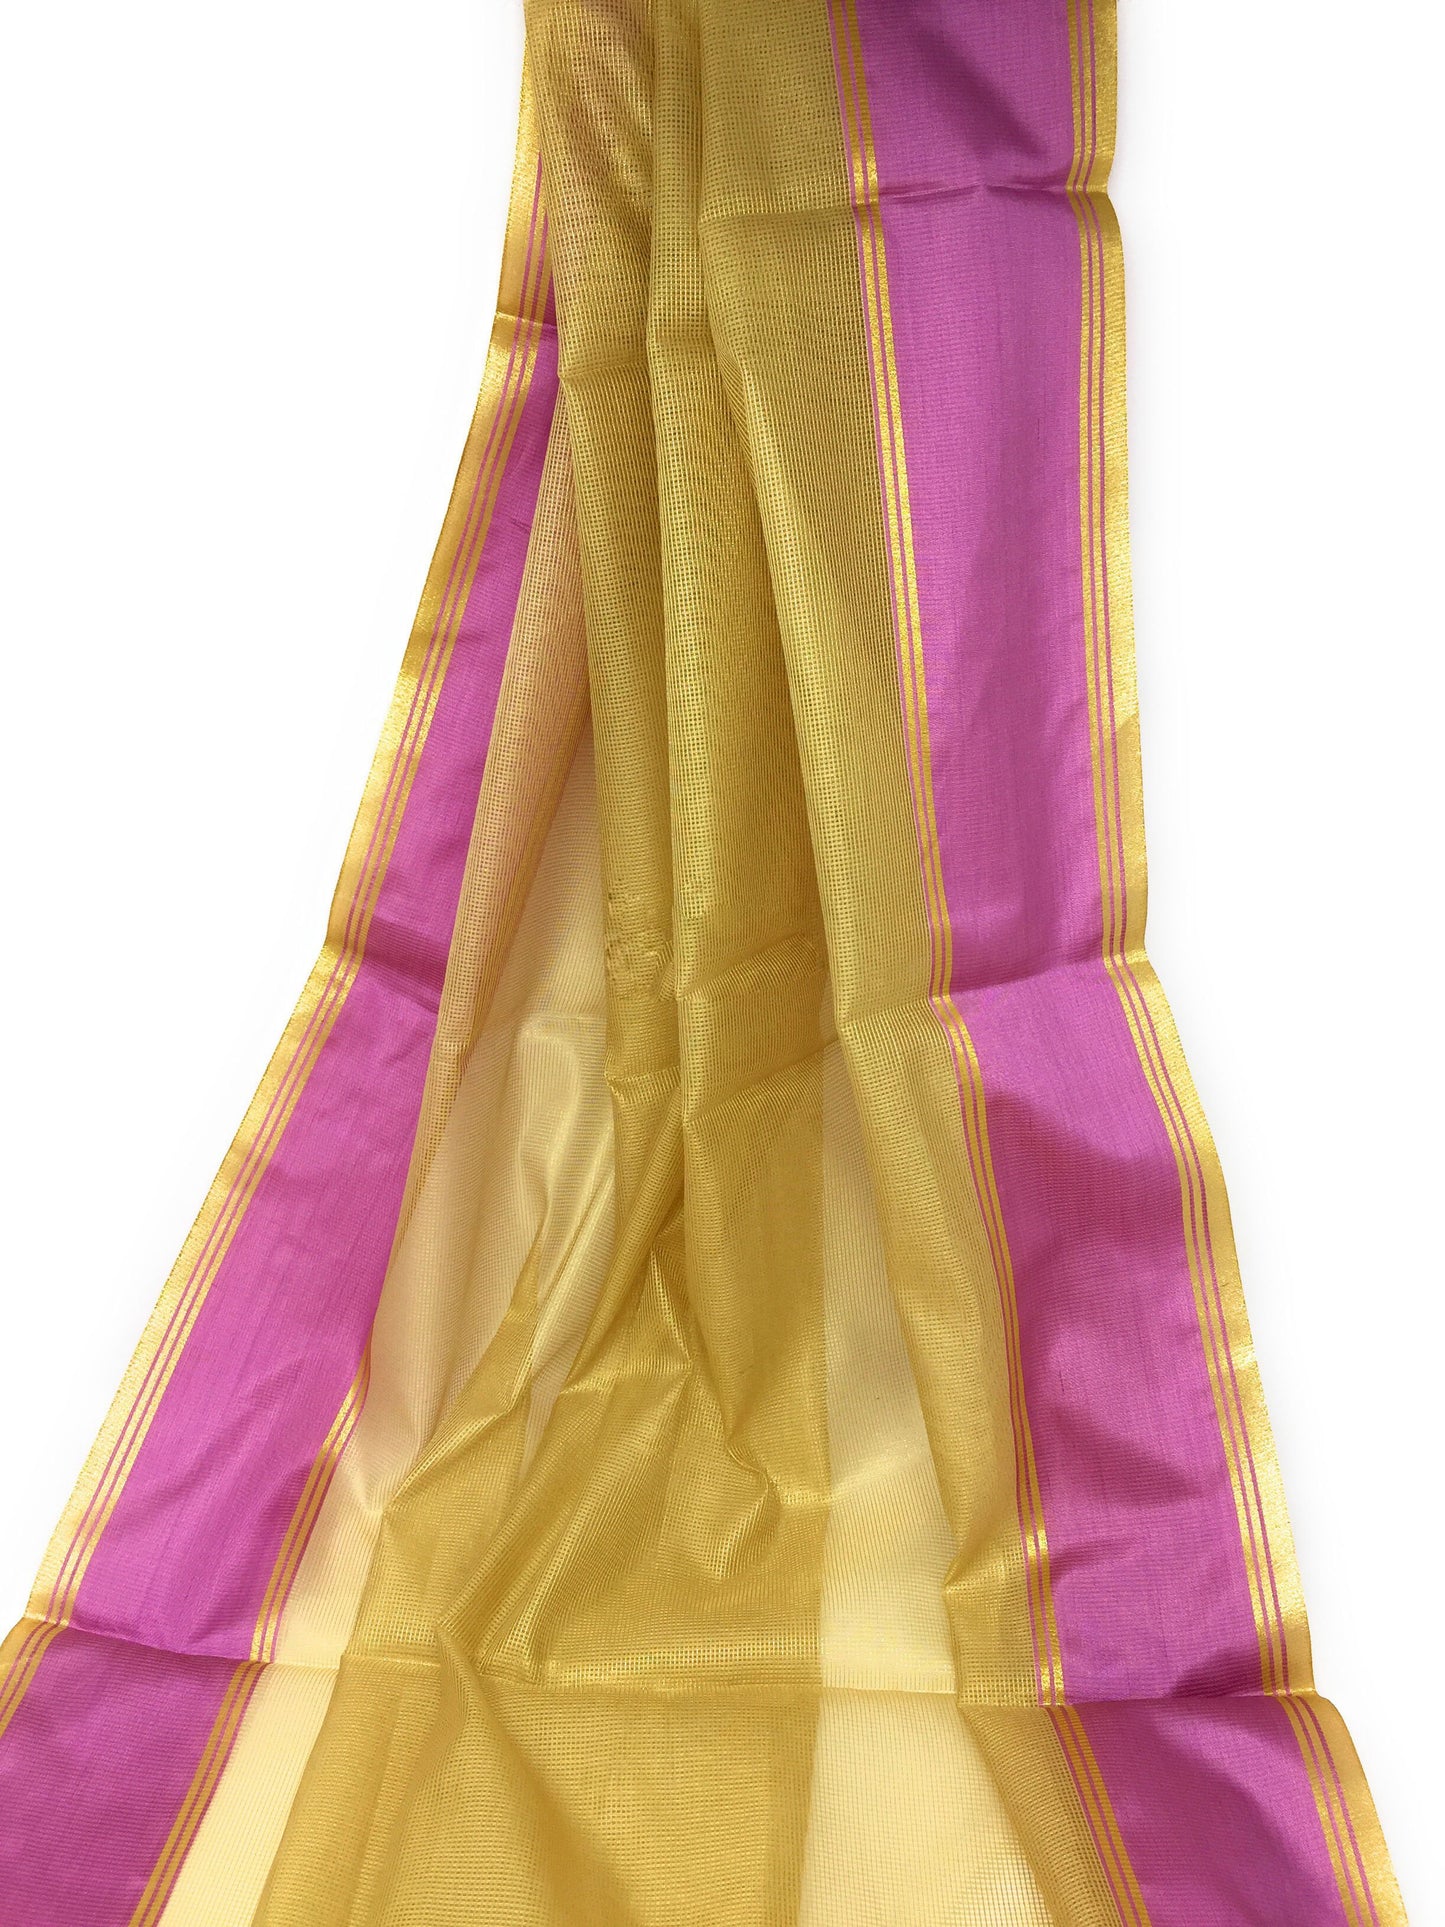 Golden Tissue Fabric with Mesh Pattern and Purple Border